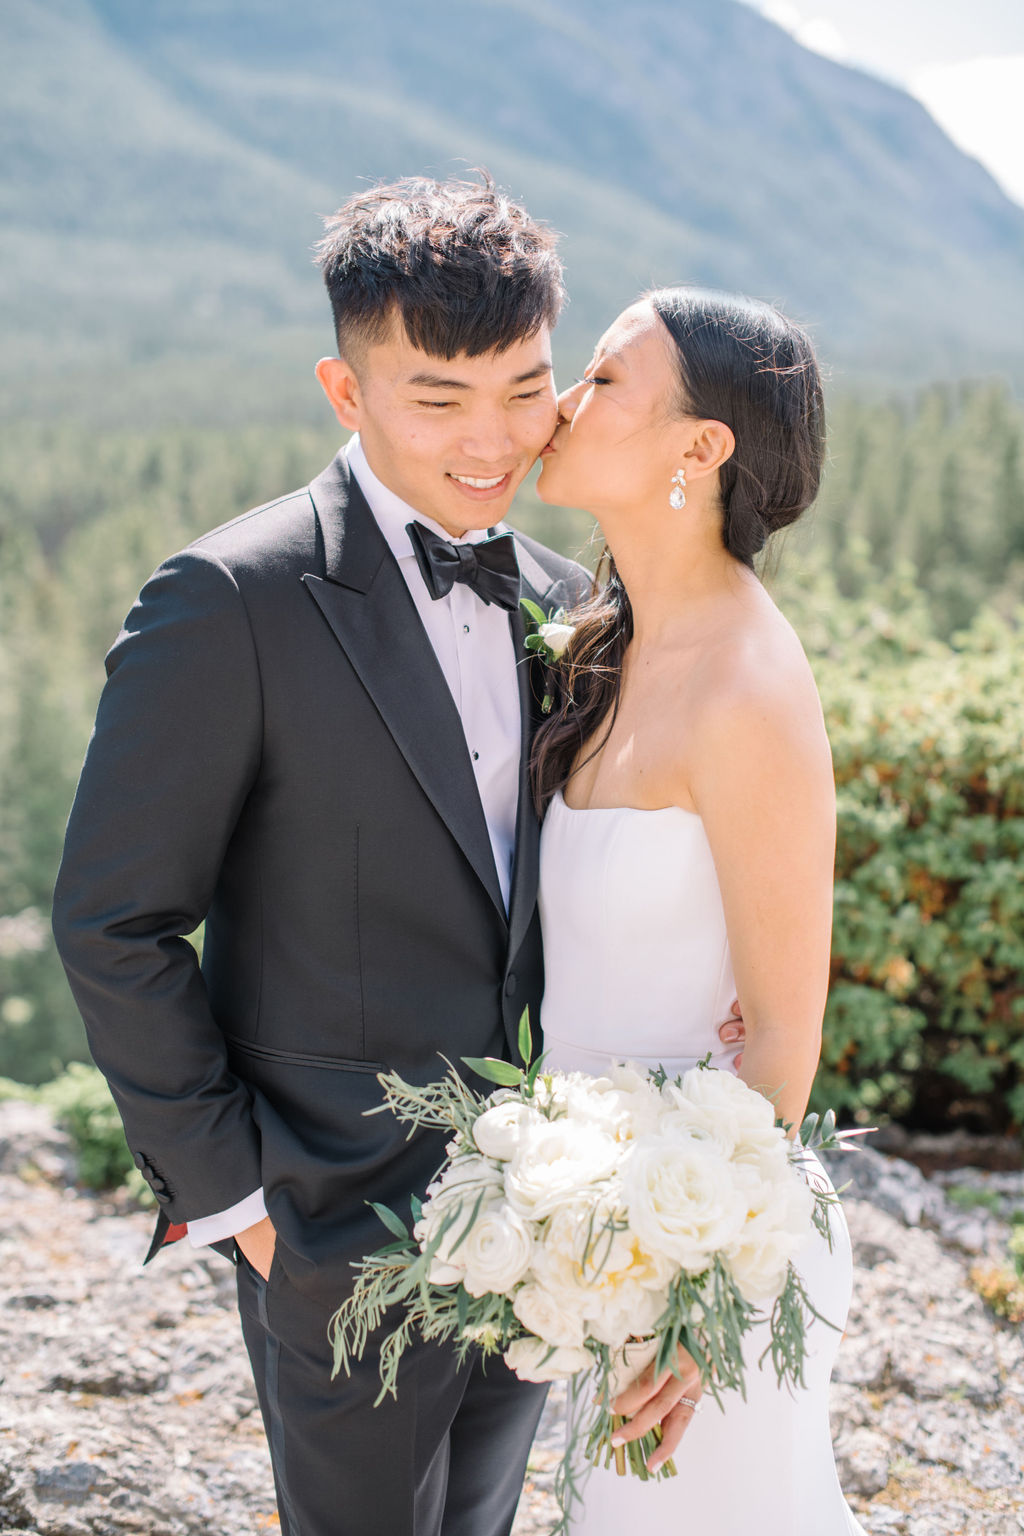 Elegant bride and groom embracing in the mountains of Banff, Alberta. Canadian summer mountain wedding inspiration. Sophisticated mountain bridal portraits by Corrina Walker Photography. 